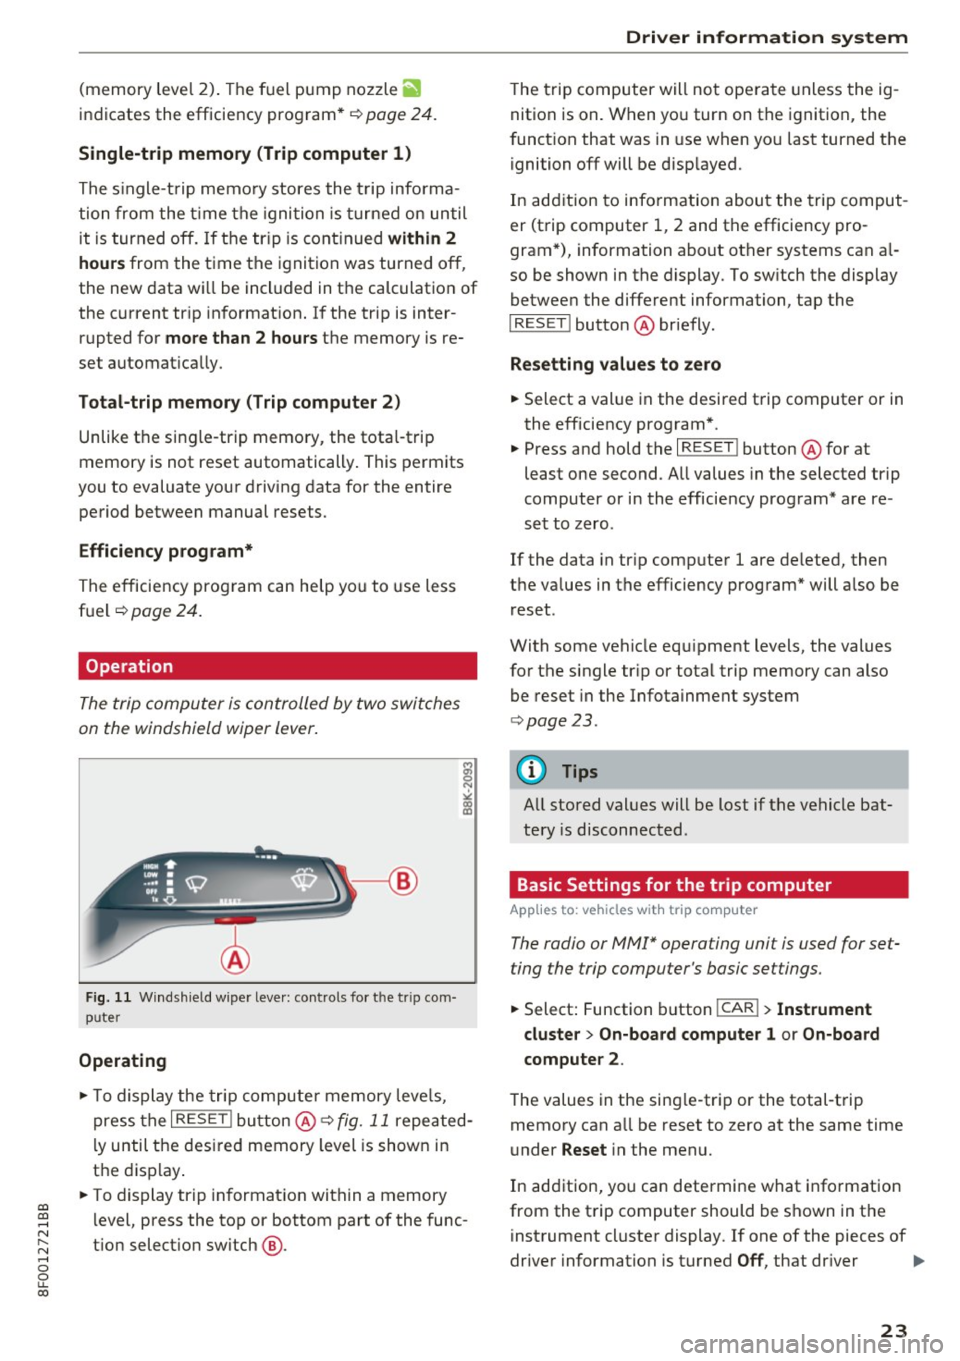 AUDI A5 CABRIOLET 2017  Owners Manual a:, 
a:, 
.... N r--. N .... 0 
0 
LL 00 
(memory  level 2). The fuel  pump  nozzle iii 
indicates  the  efficiency  program*¢ page  24. 
Single-trip  memory  (Trip computer  1) 
The  single-trip  me